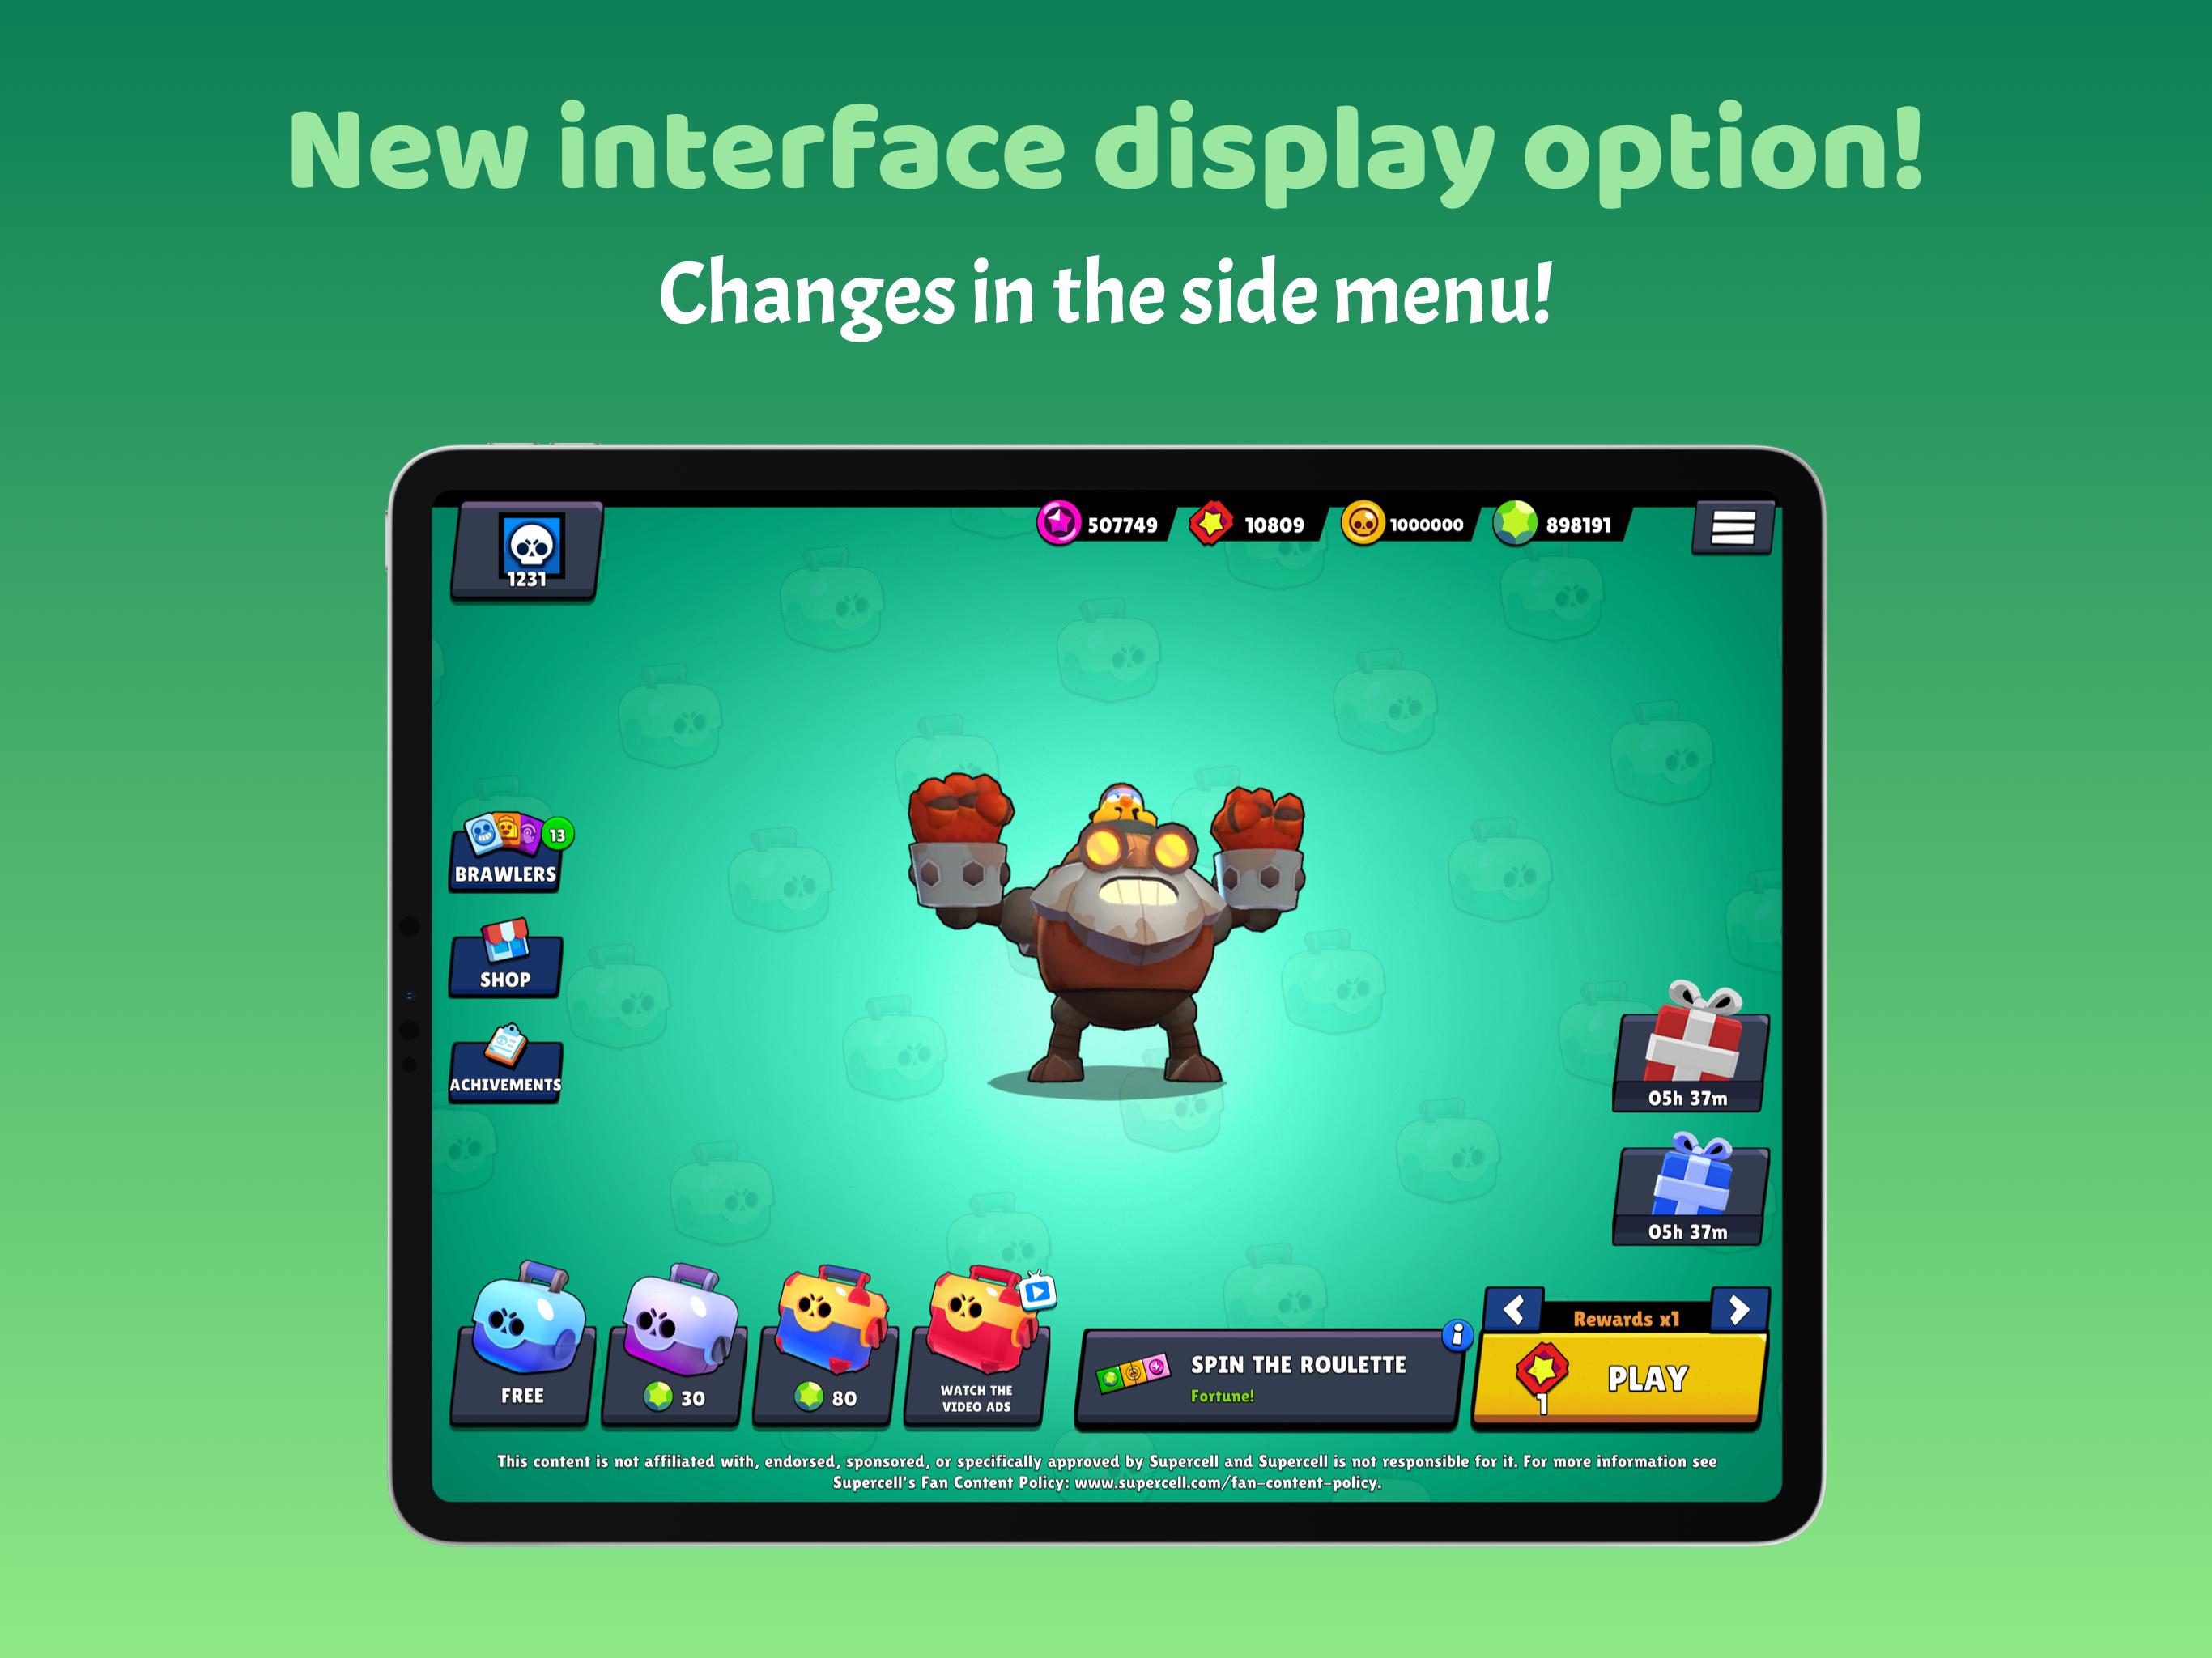 26 Top Pictures Brawl Stars Hack Download Uptodown Brawl Stars 32 170 Download For Android Apk Free Sanantonio Payday Loan - brawl stars en uptodown com android download